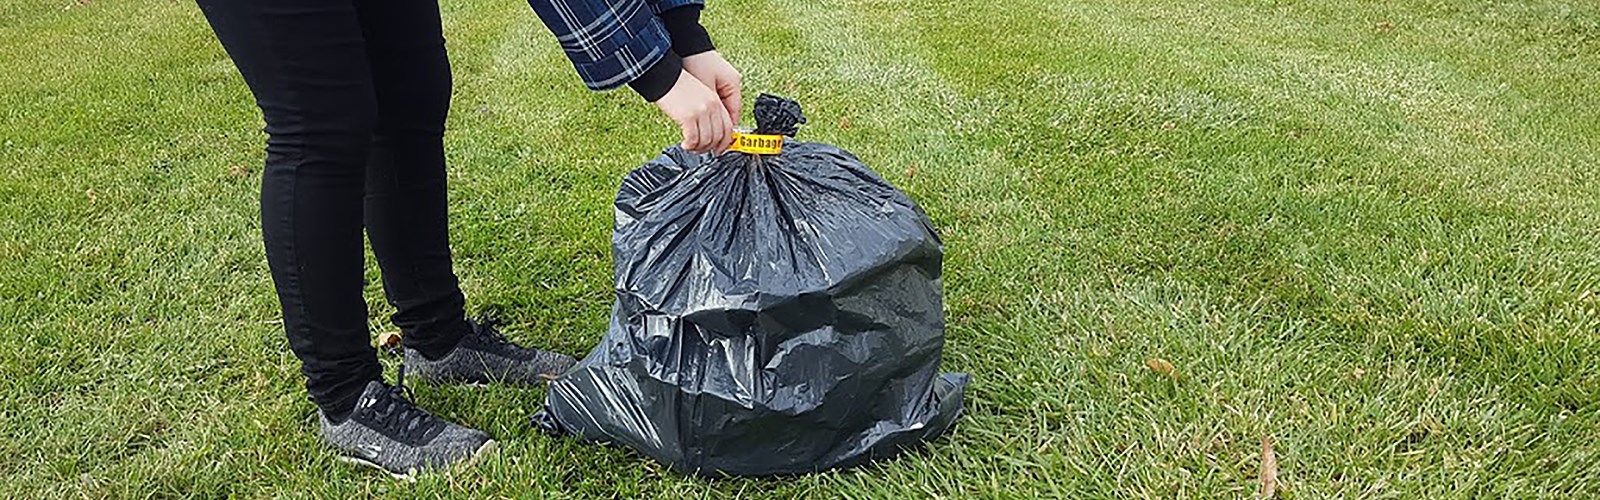 person tying a garbage bag tag on a garbage bag